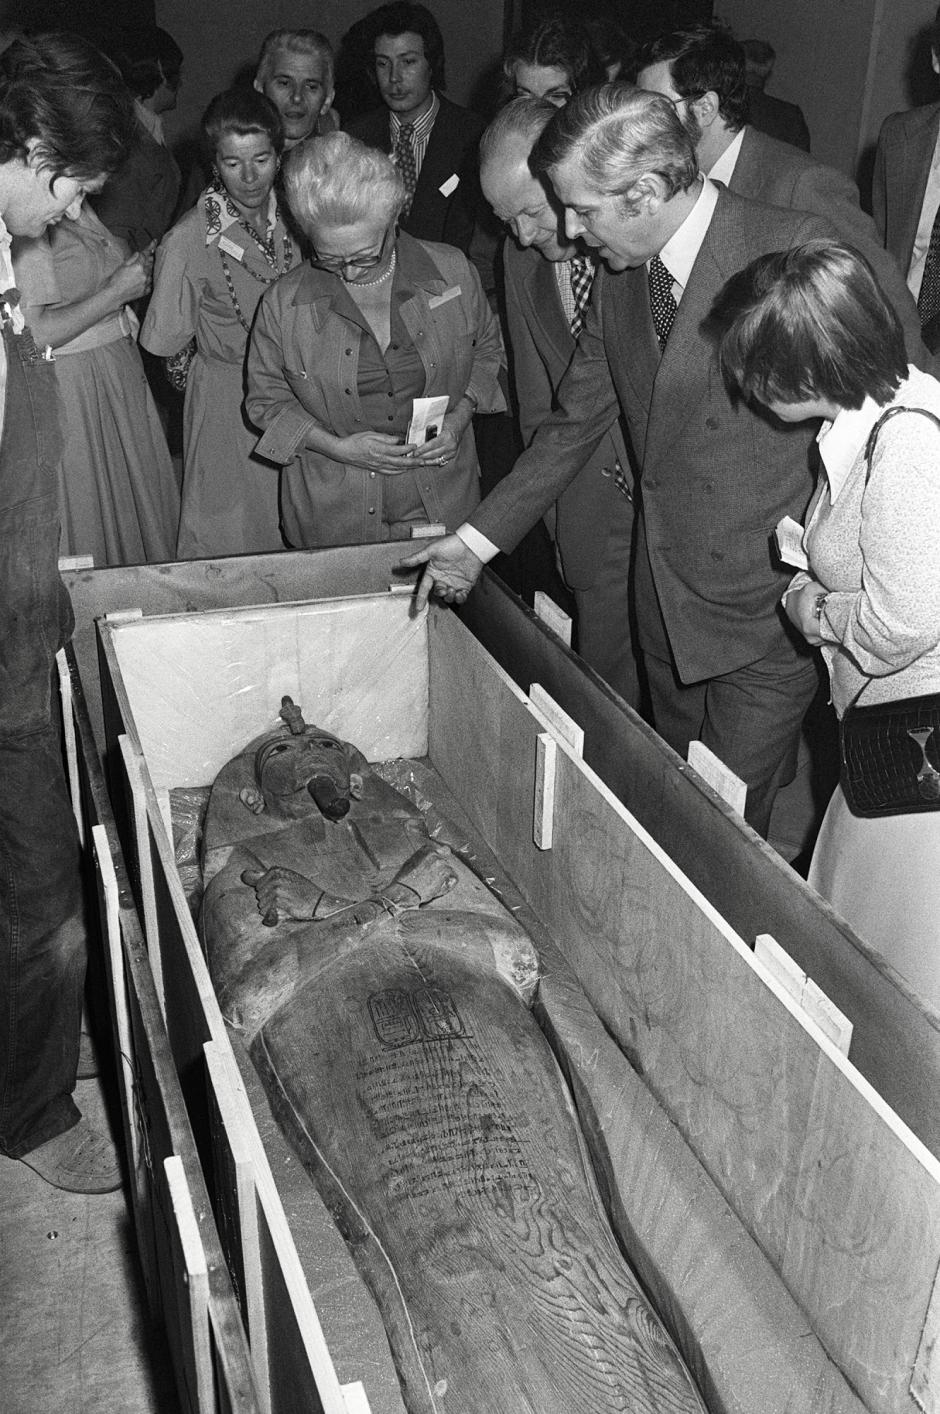 (FILES) In this file photo taken on May 11, 1976, Egyptian Ambassador Naguib Kadry and Egyptologist Christiane Desroches-Noblecourt attend the opening of the sarcophagus of Pharaoh Ramses II during an exhibition dedicated to him at the Grand Palais in Paris. - The painted wooden sarcophagus of Ramses II, an exceptional loan from Egypt to France, will be presented in Paris for the first time in 45 years from April 2023, as part of an exhibition-event devoted to this great Egyptian sovereign and the gold of the pharaohs, the organizers announced on January 12, 2023. (Photo by STAFF / AFP)